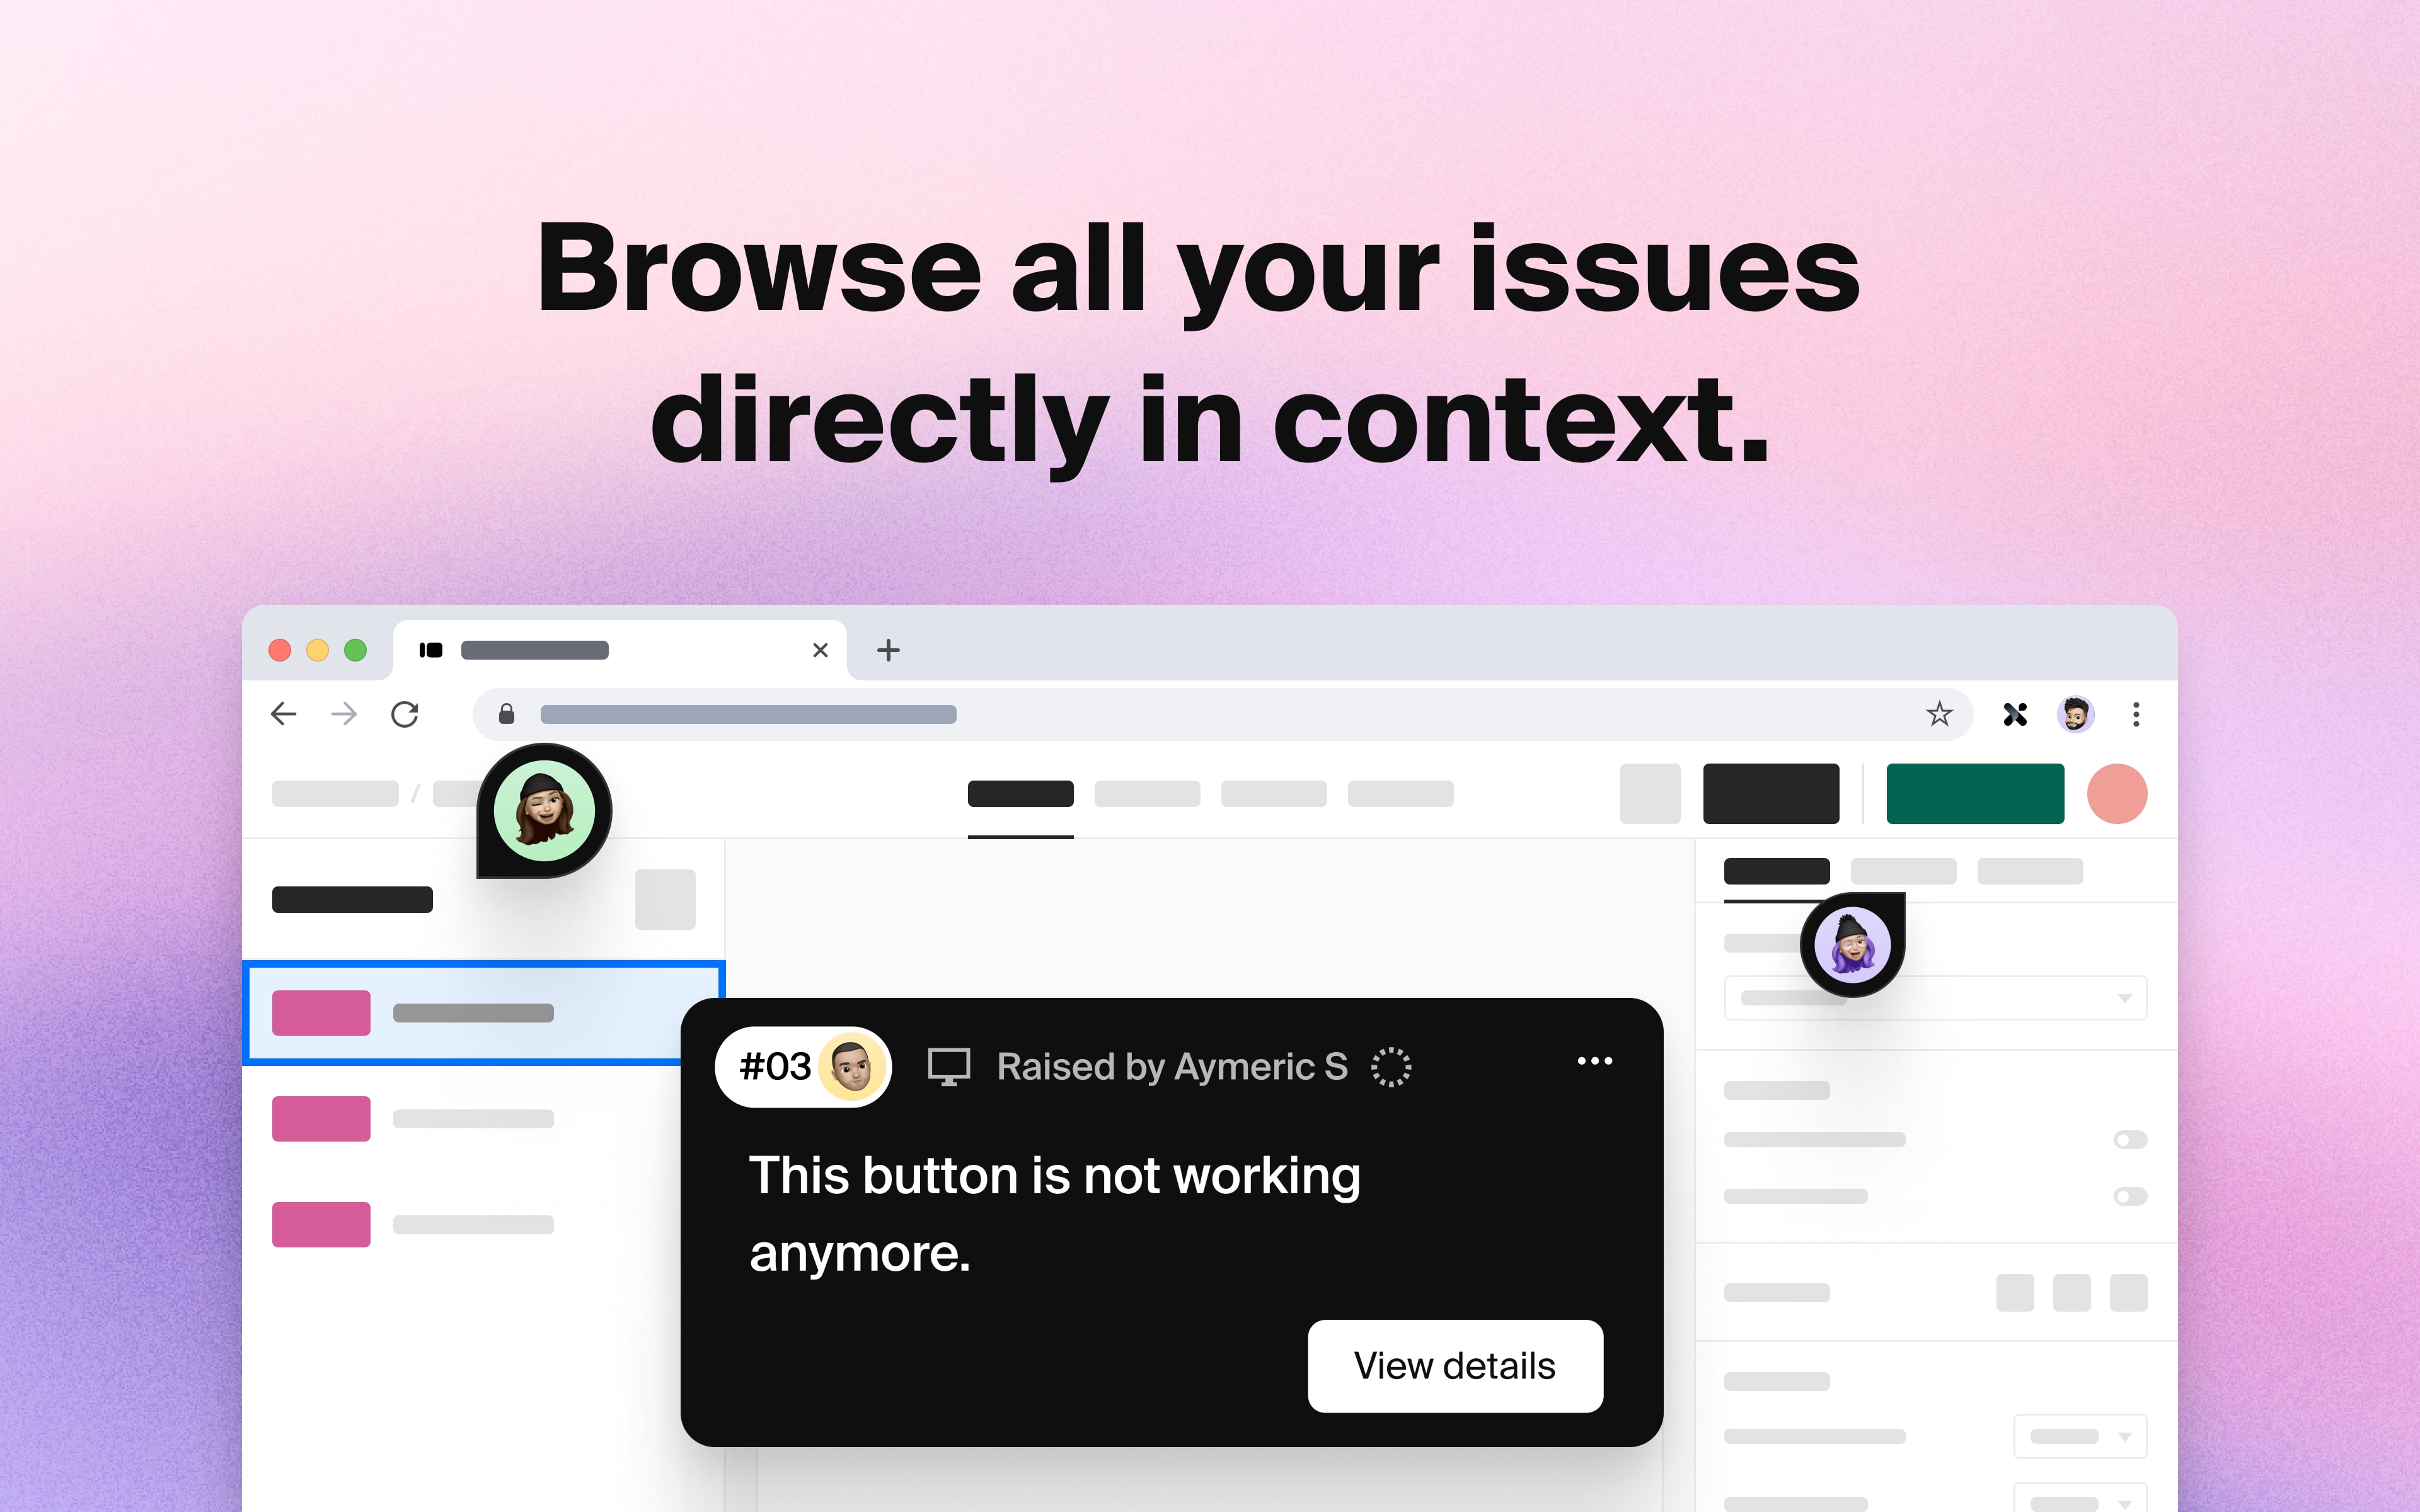 Browse all your issues directly in context.